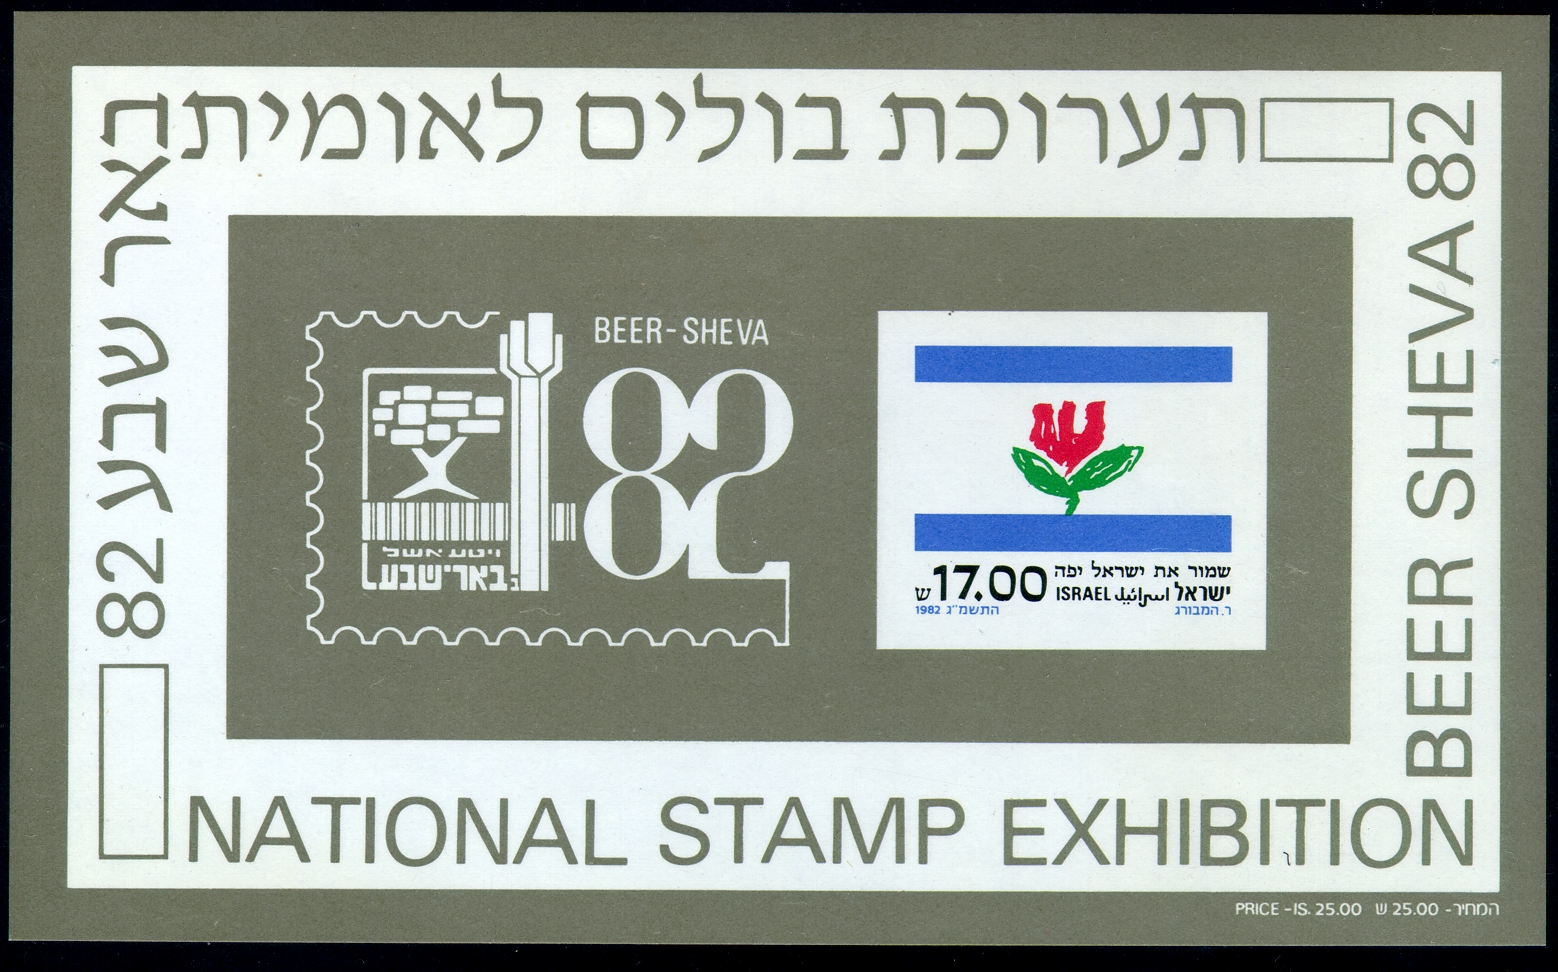 http://static.israelphilately.org.il/images/stamps/3229_L.jpg